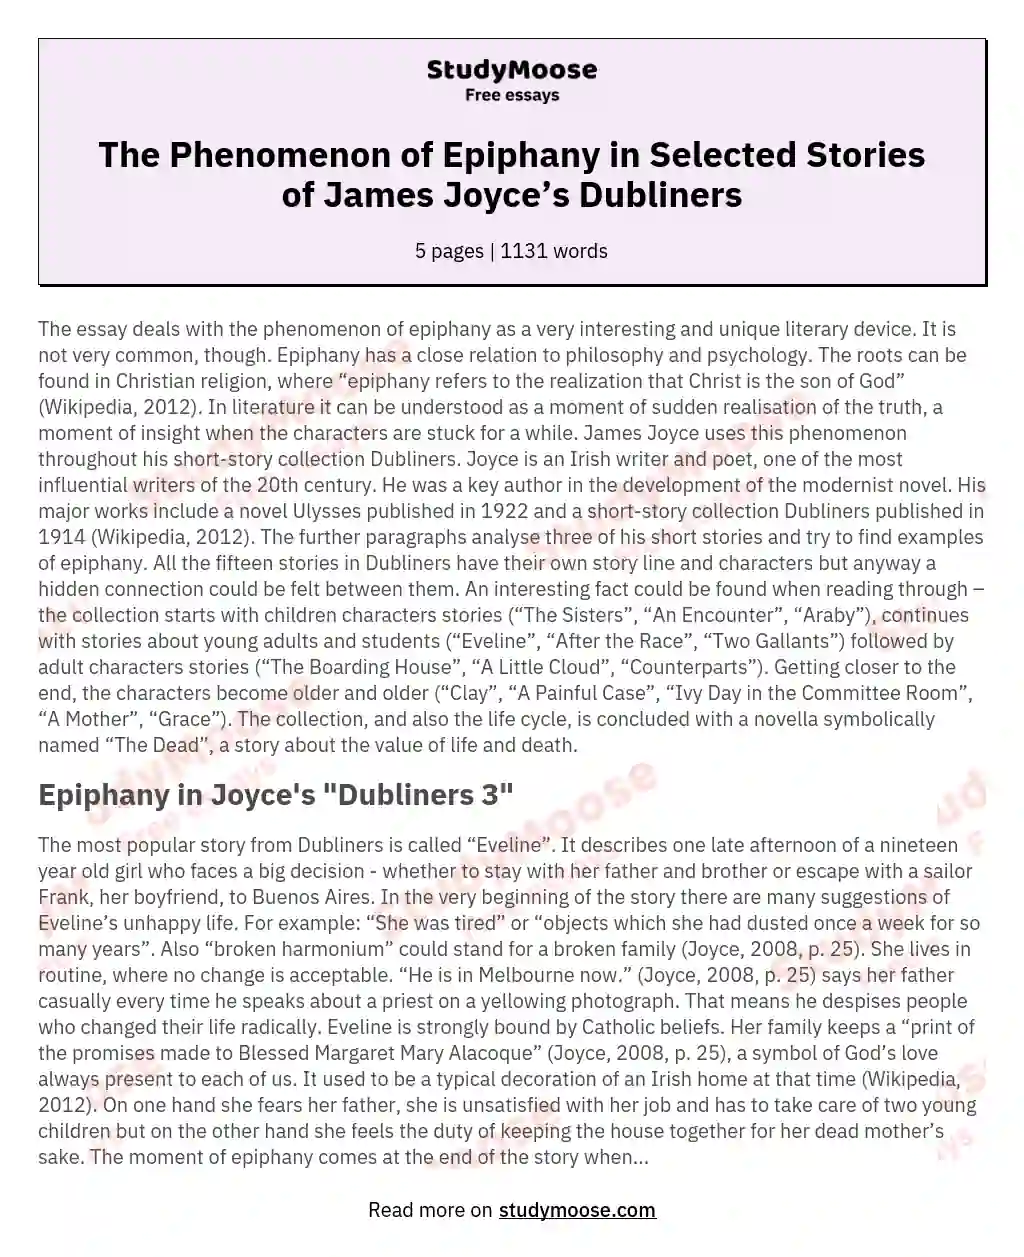 The Phenomenon of Epiphany in Selected Stories of James Joyce’s Dubliners